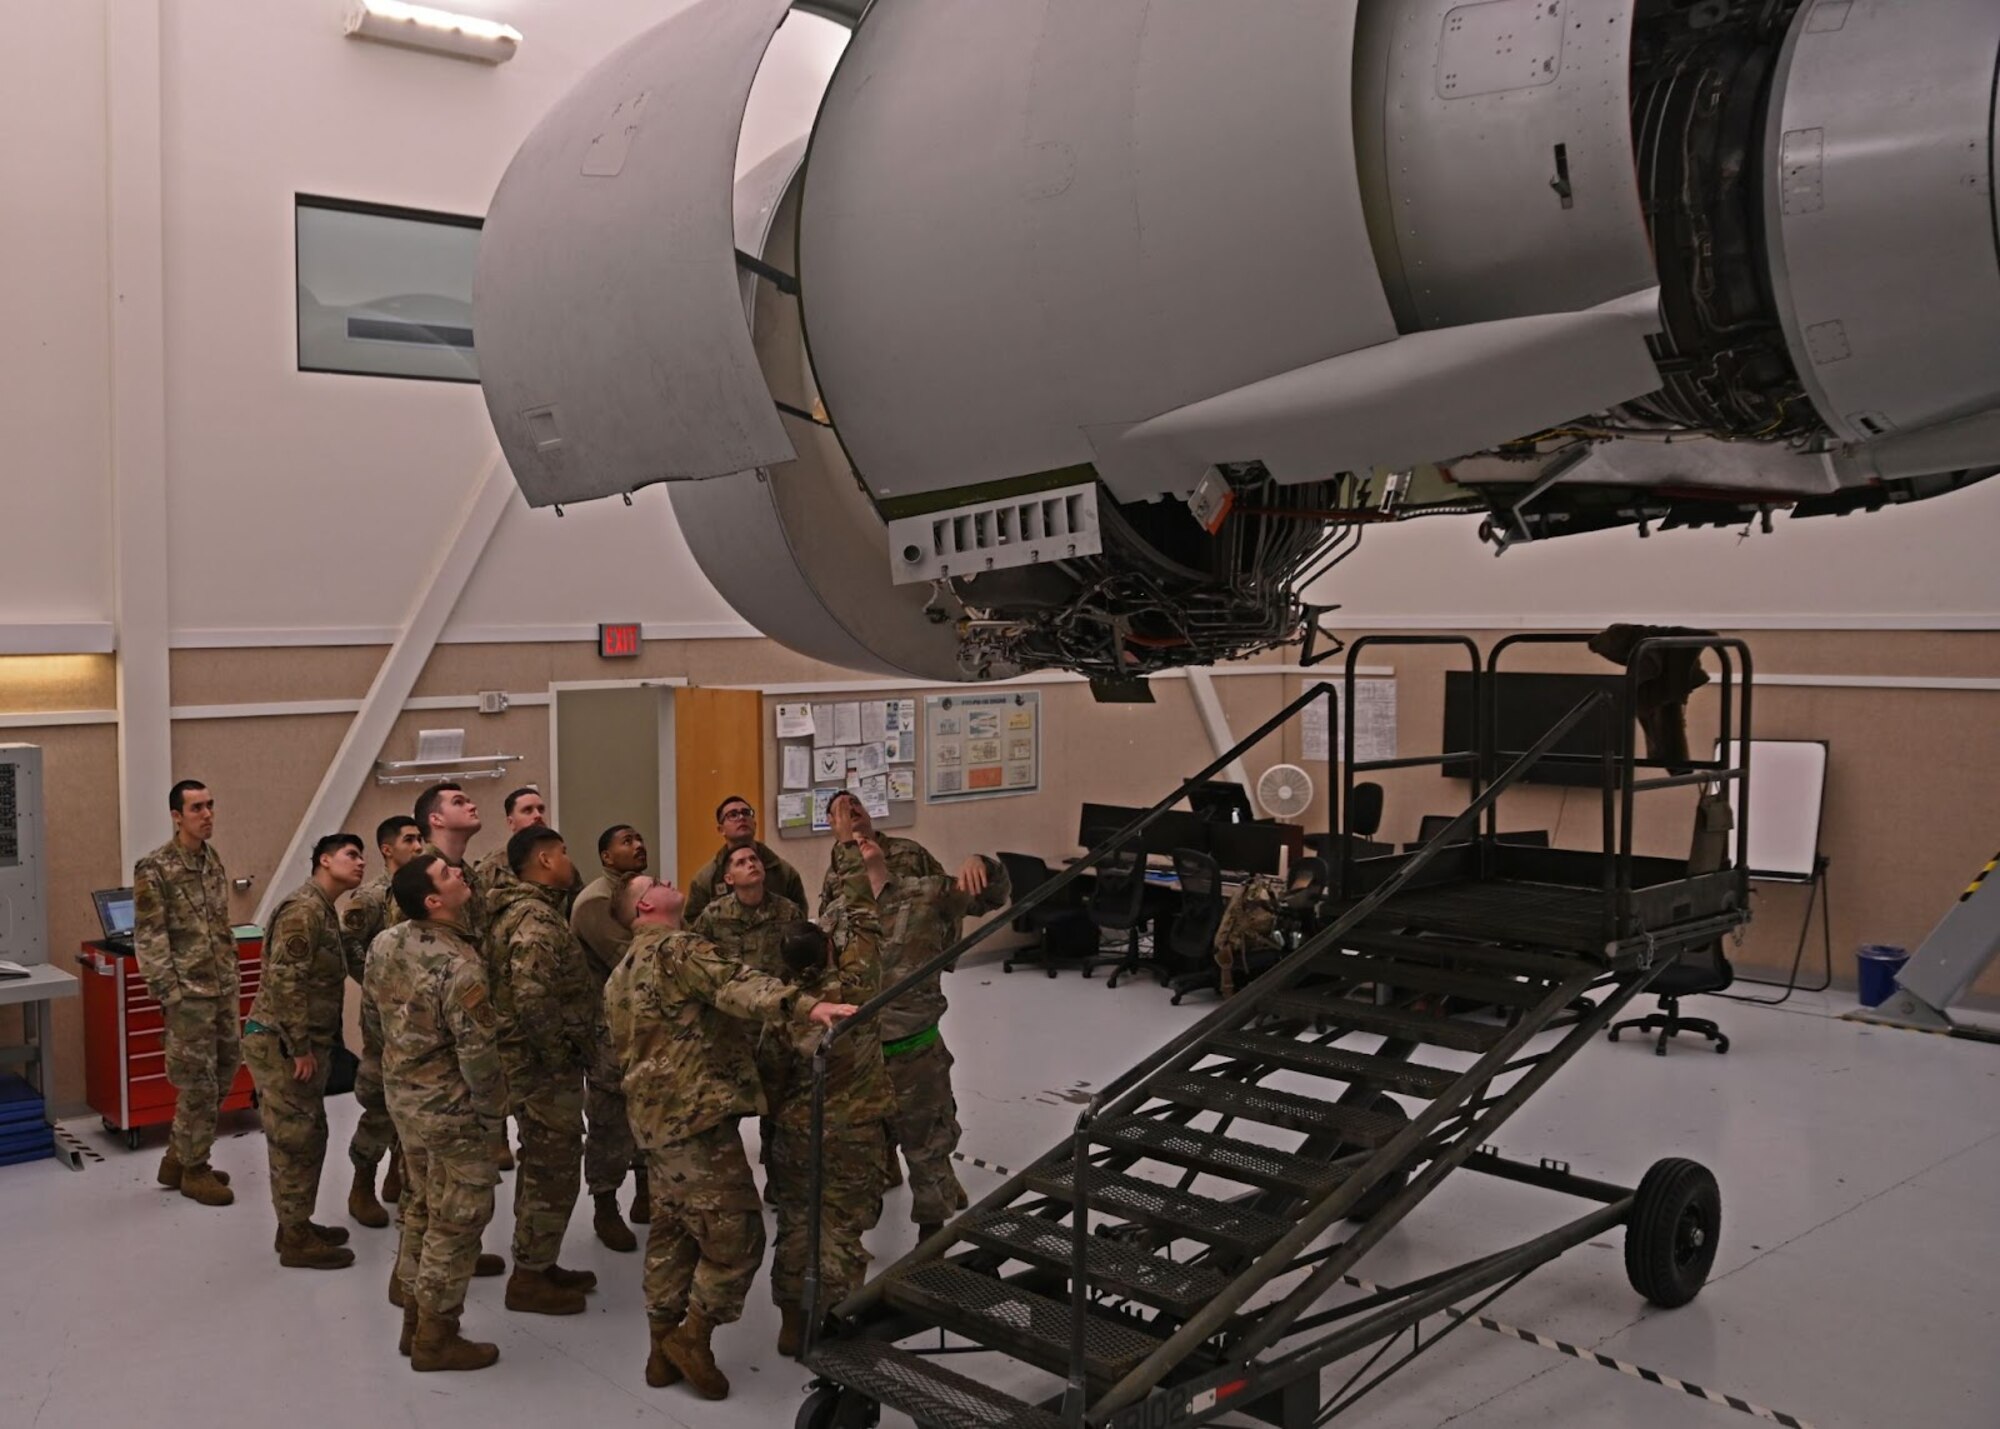 Airmen with the 62nd Maintenance Group observe a training C-17 Globemaster III engine during Agile Combat Employment training at Joint Base Lewis-McChord, Washington, April 21, 2022. The week-long ACE training reinforces the team dynamic required for maintenance Airmen to operate effectively in limited support locations while continuing to maintain mission effectiveness. (U.S. Air Force photo by Airman 1st Class Callie Norton)